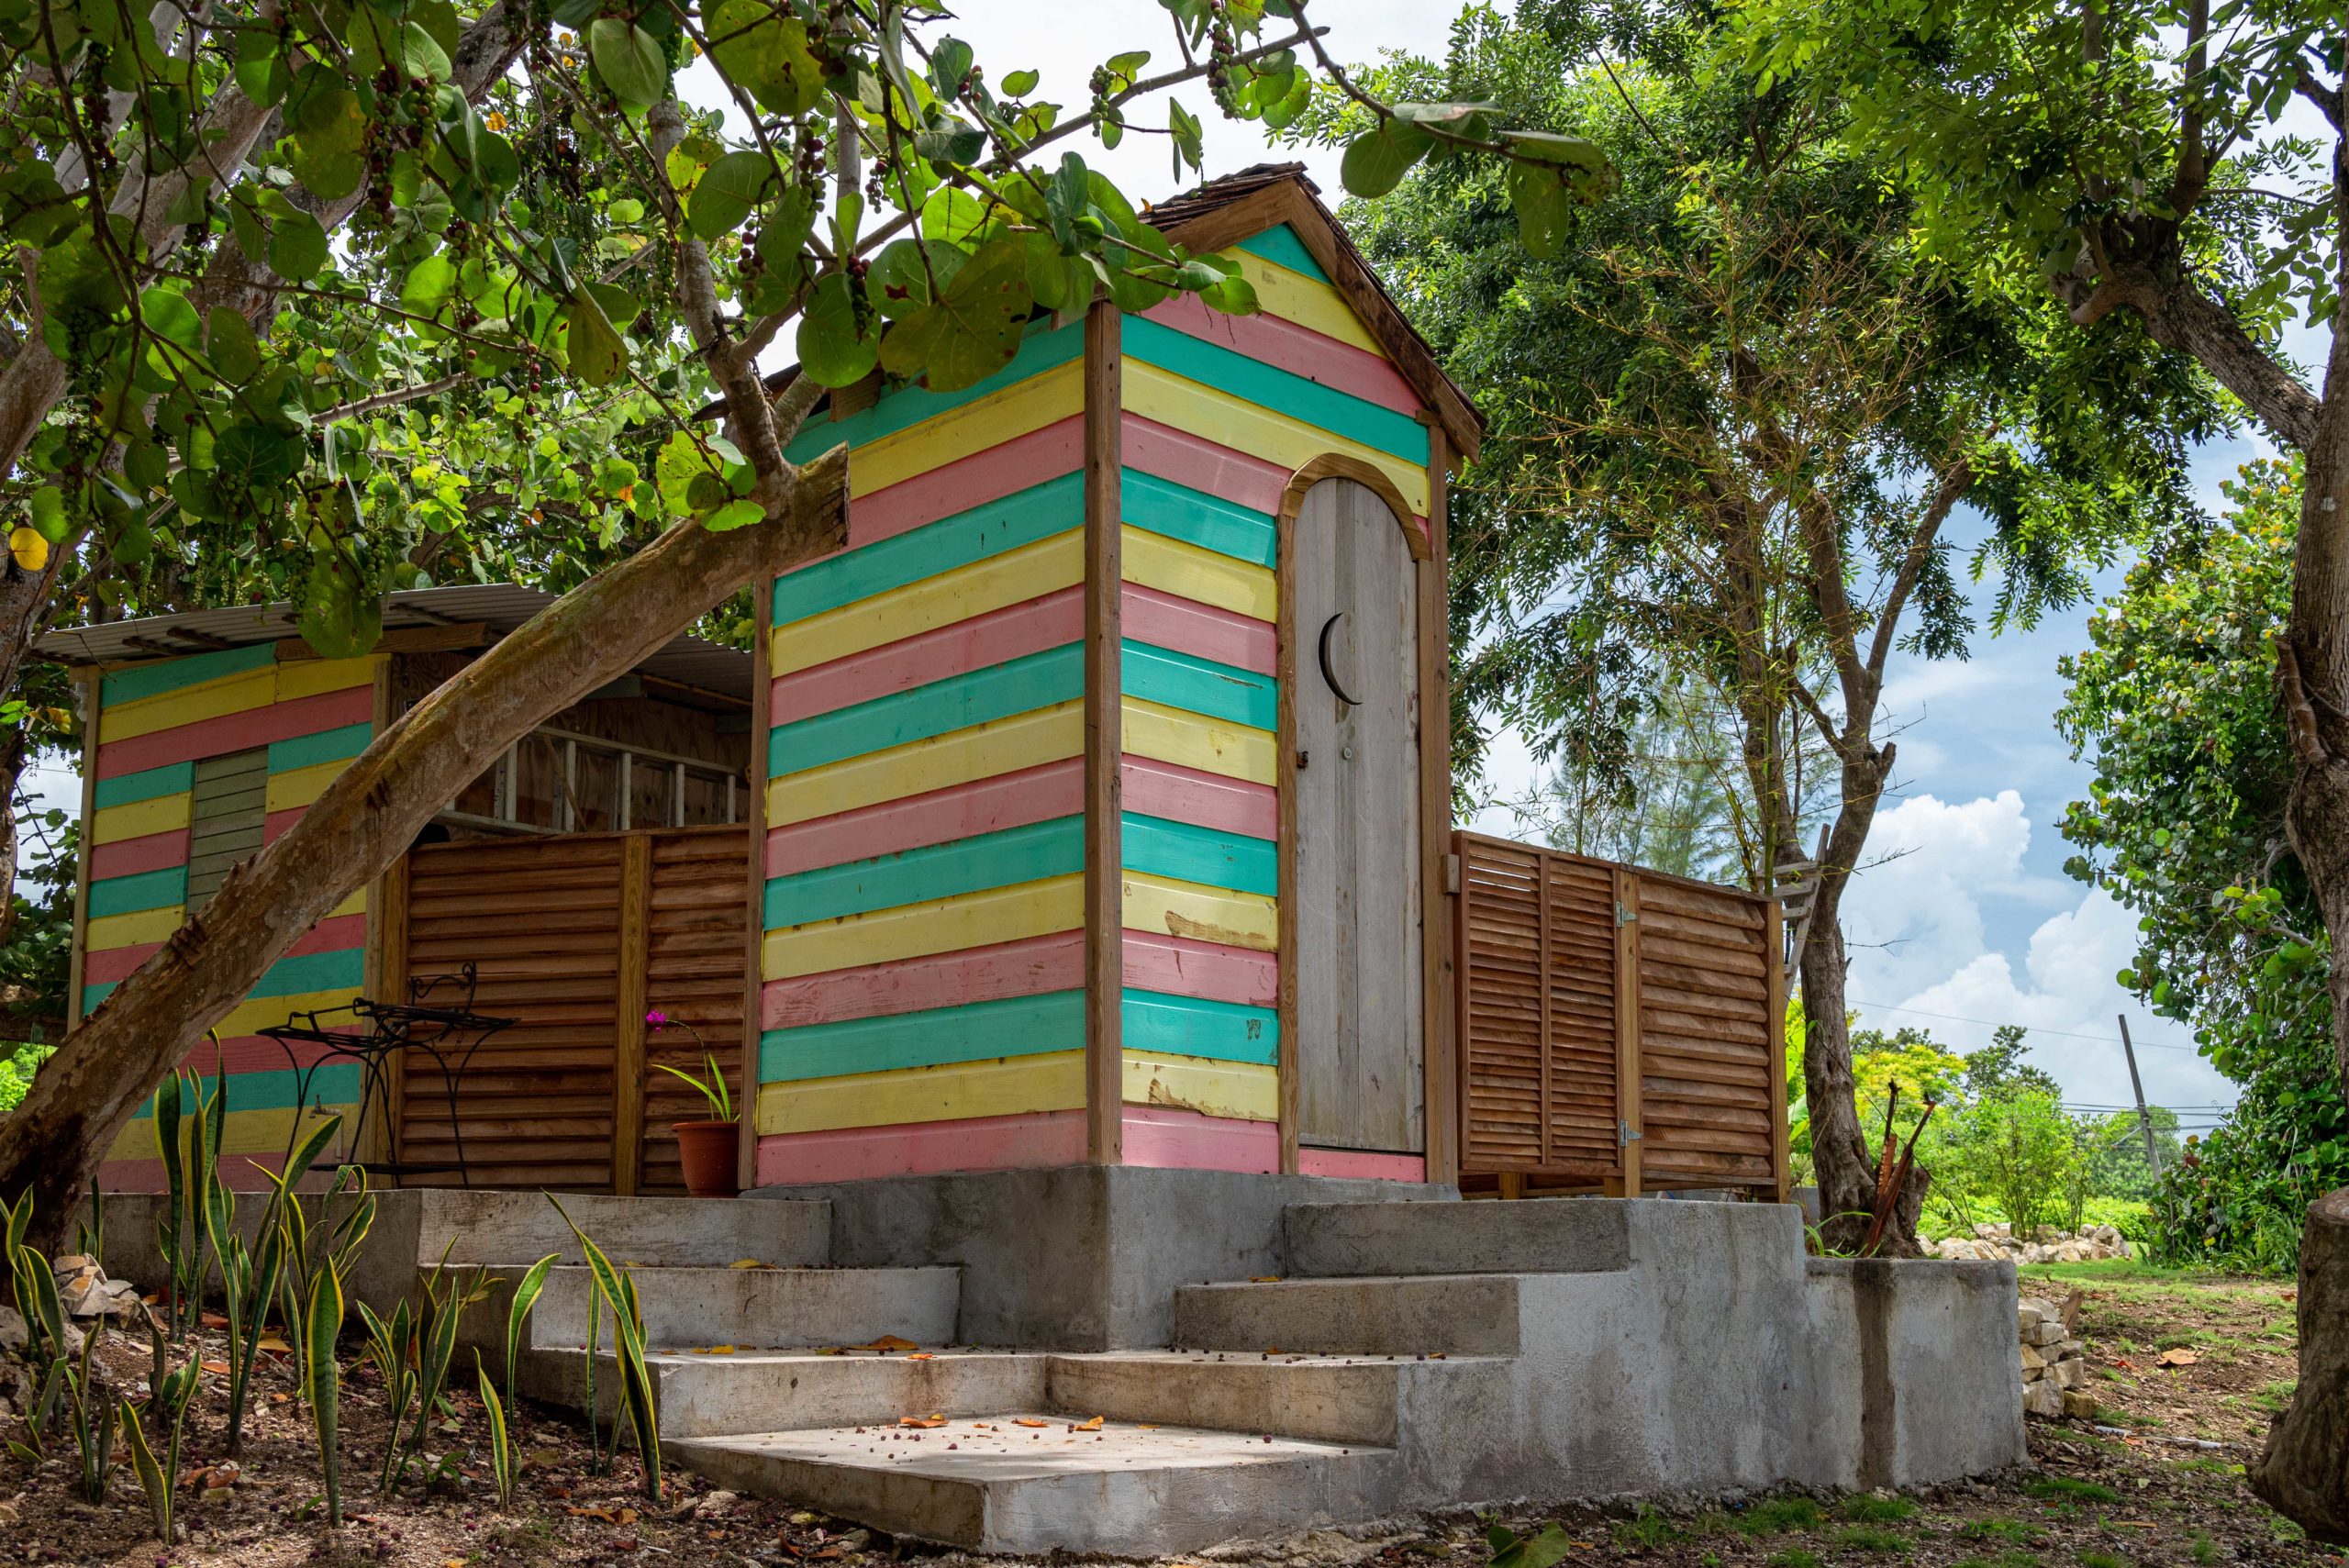 Poet Reef Outhouse